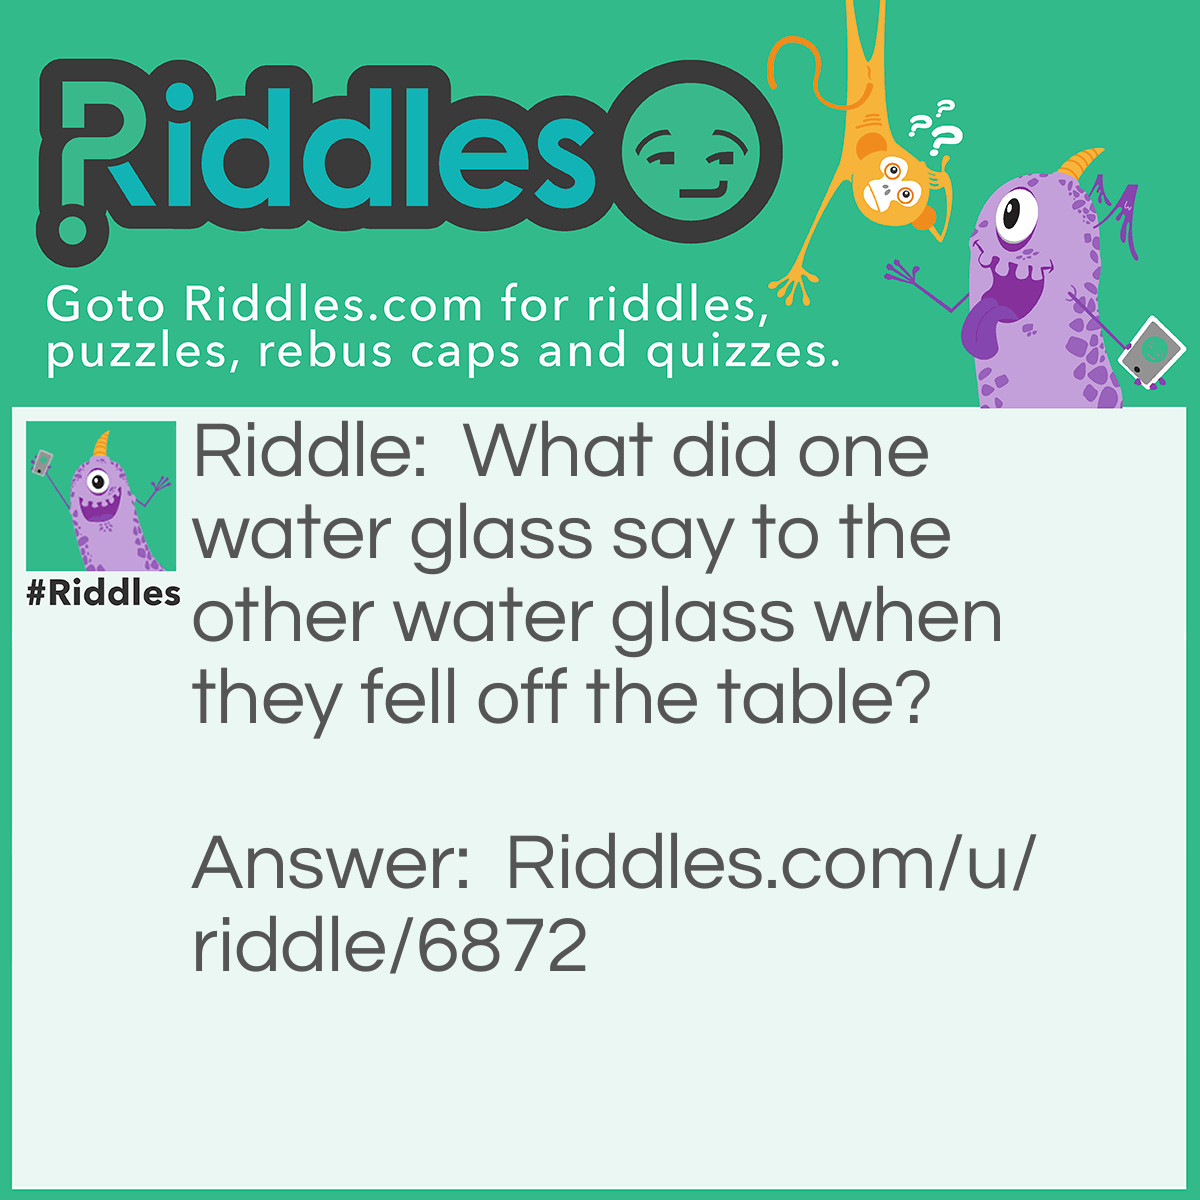 Riddle: What did one water glass say to the other water glass when they fell off the table? Answer: Nothing. They just cracked up.